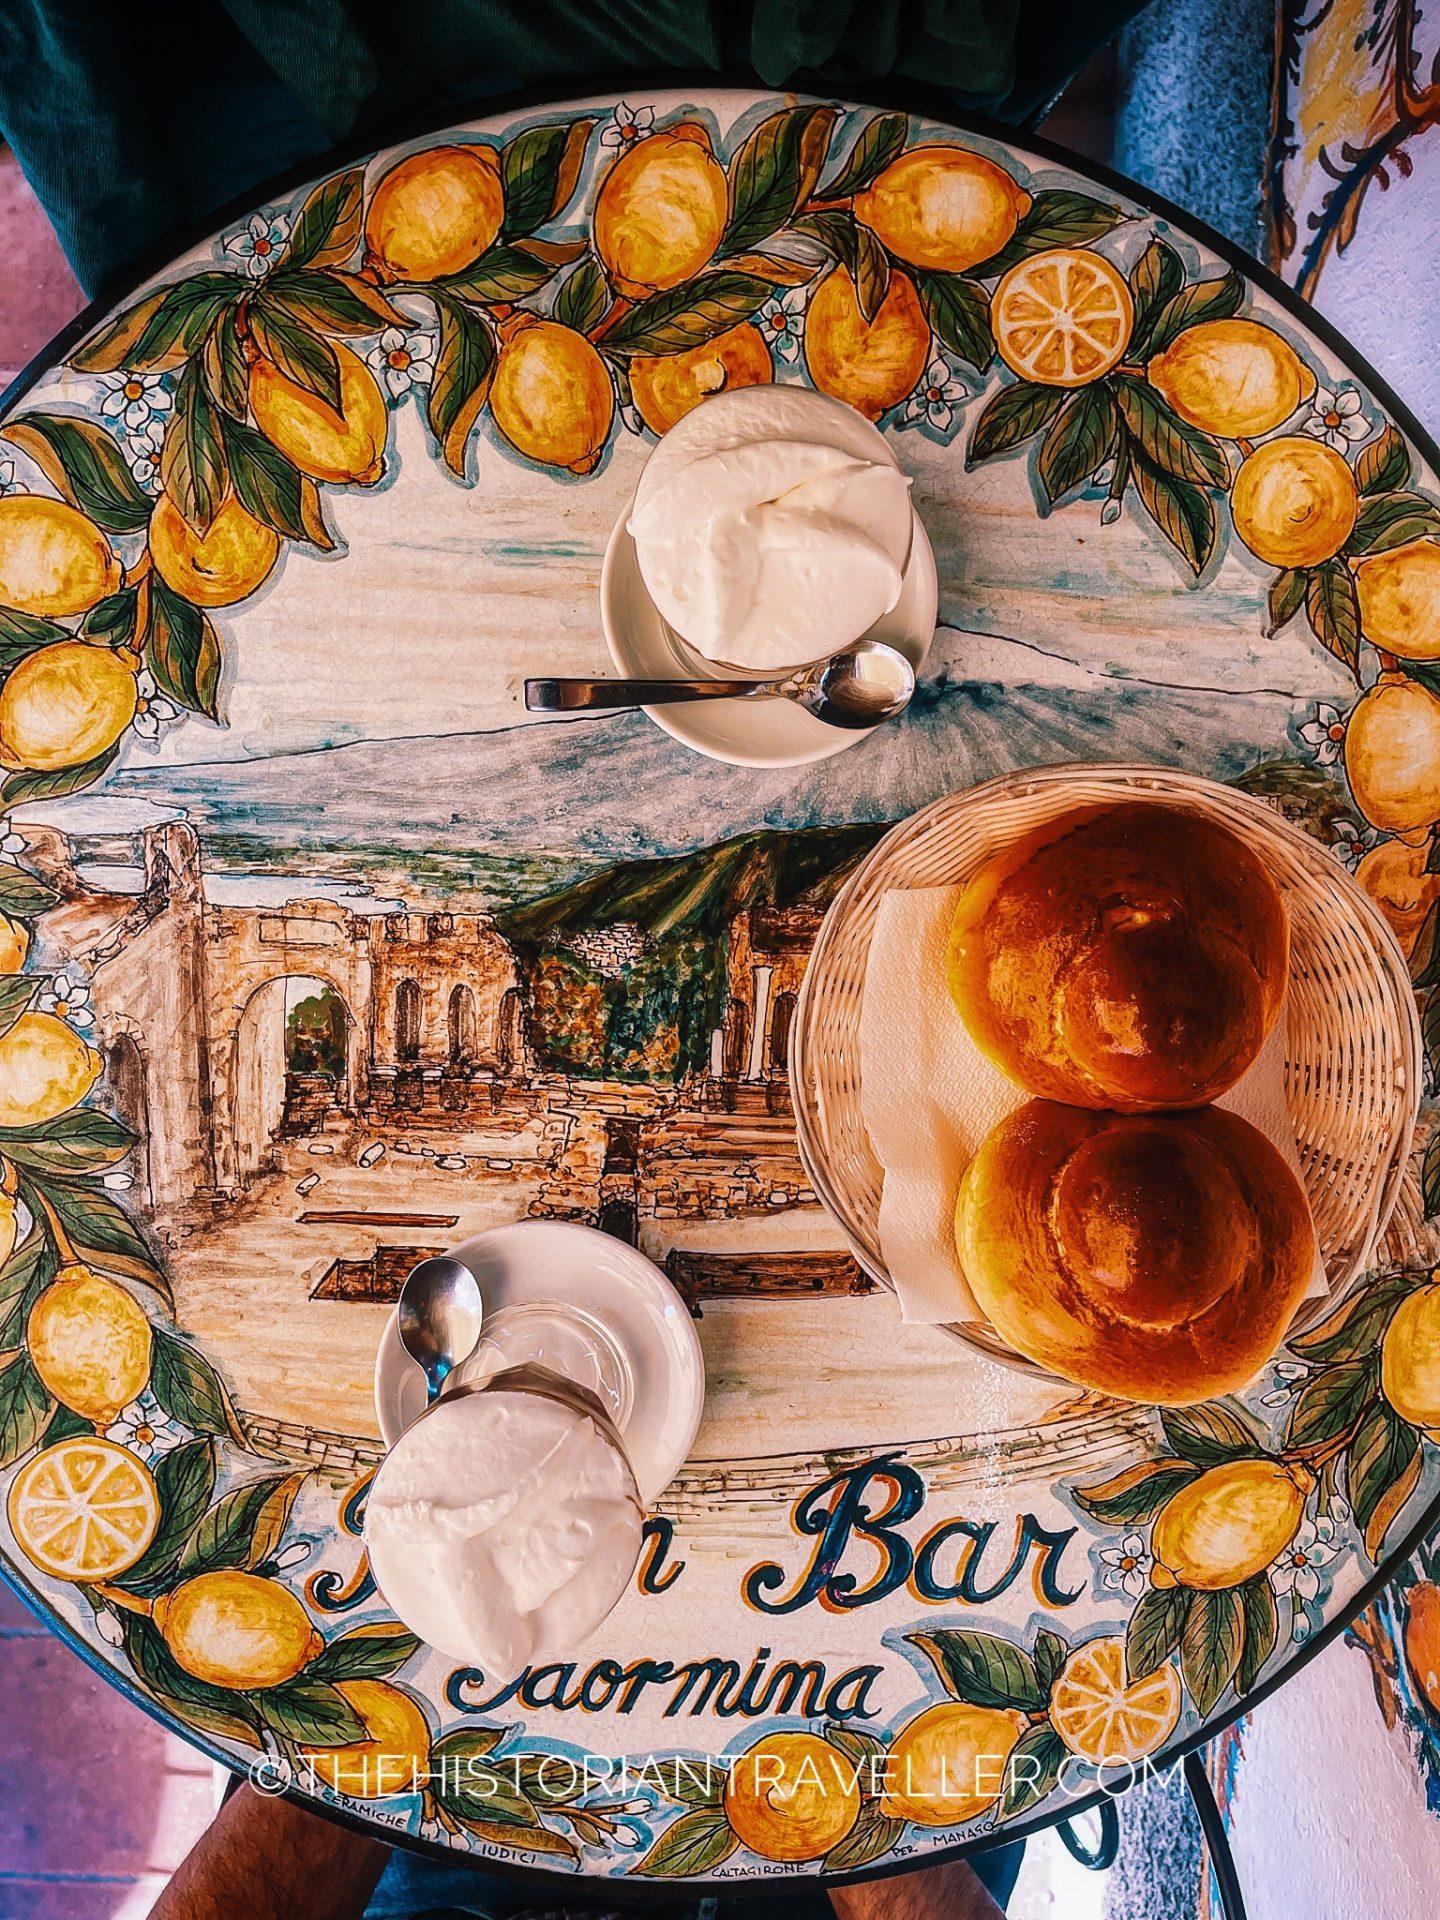 table displaying two granita and brioches